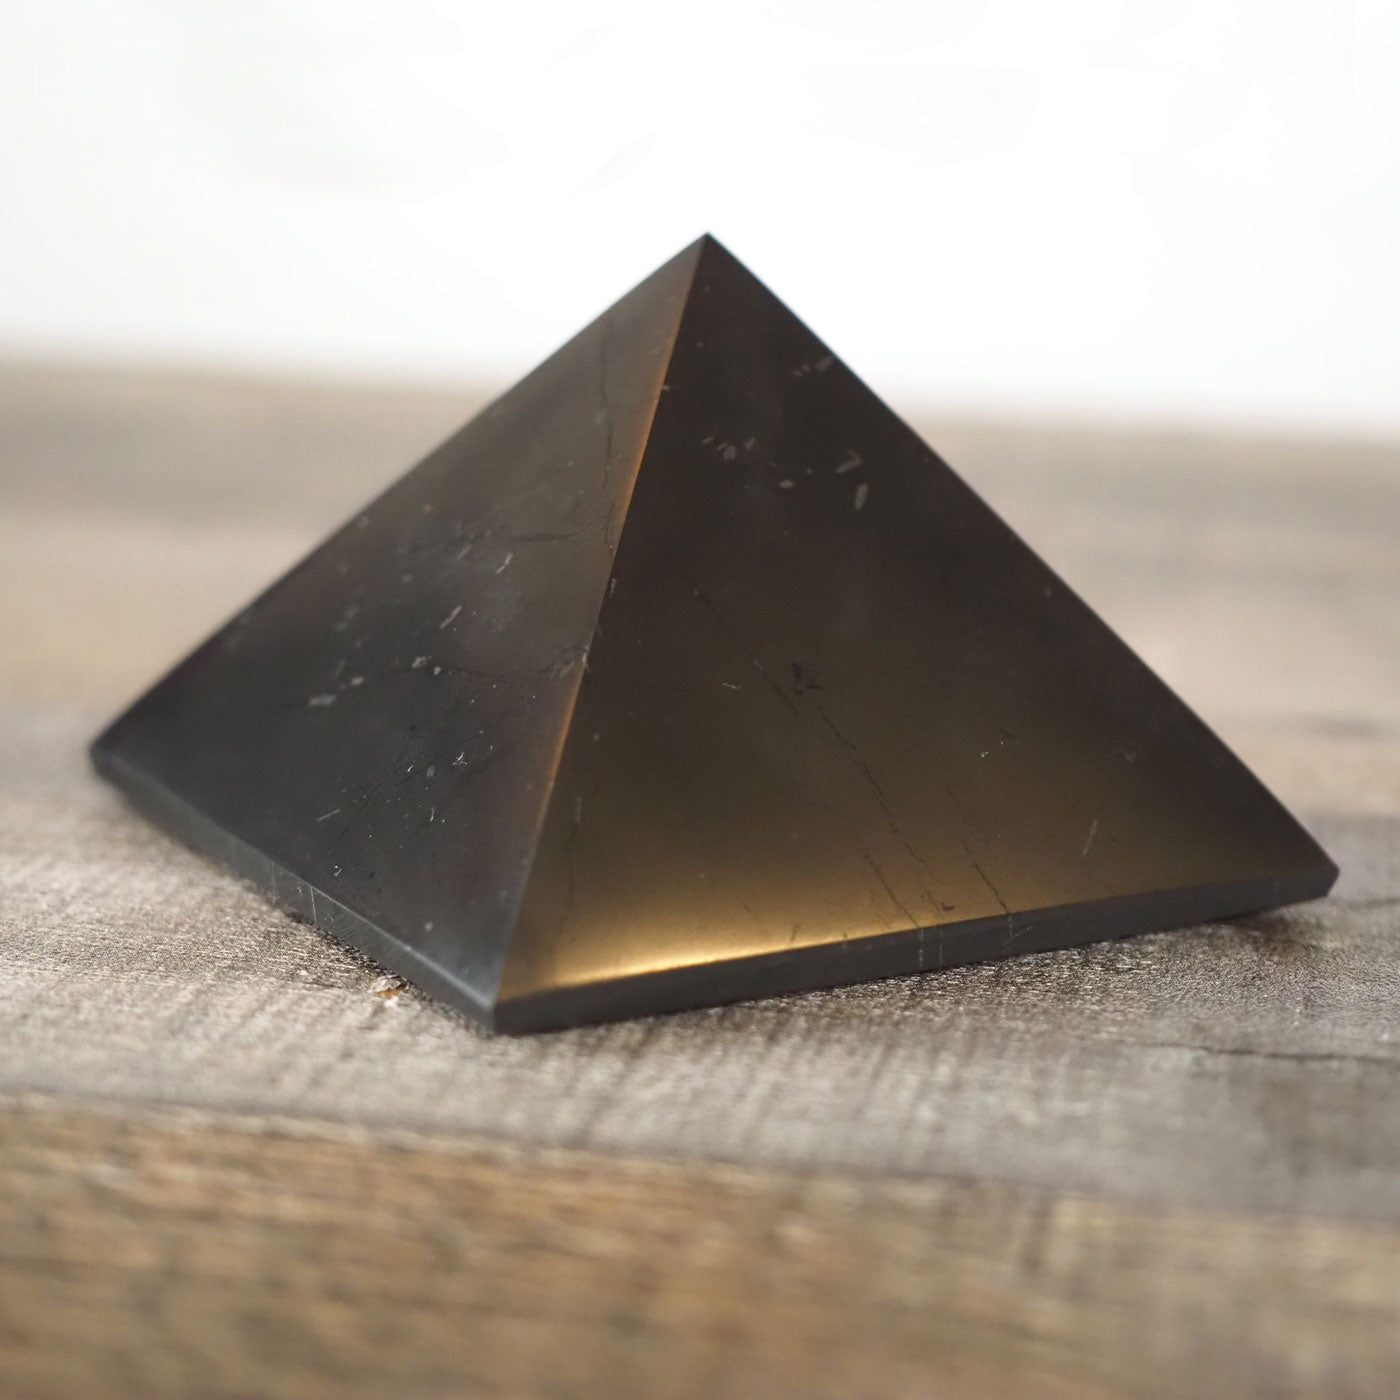 Deep black Shungite pyramid that is about 3" square at the base